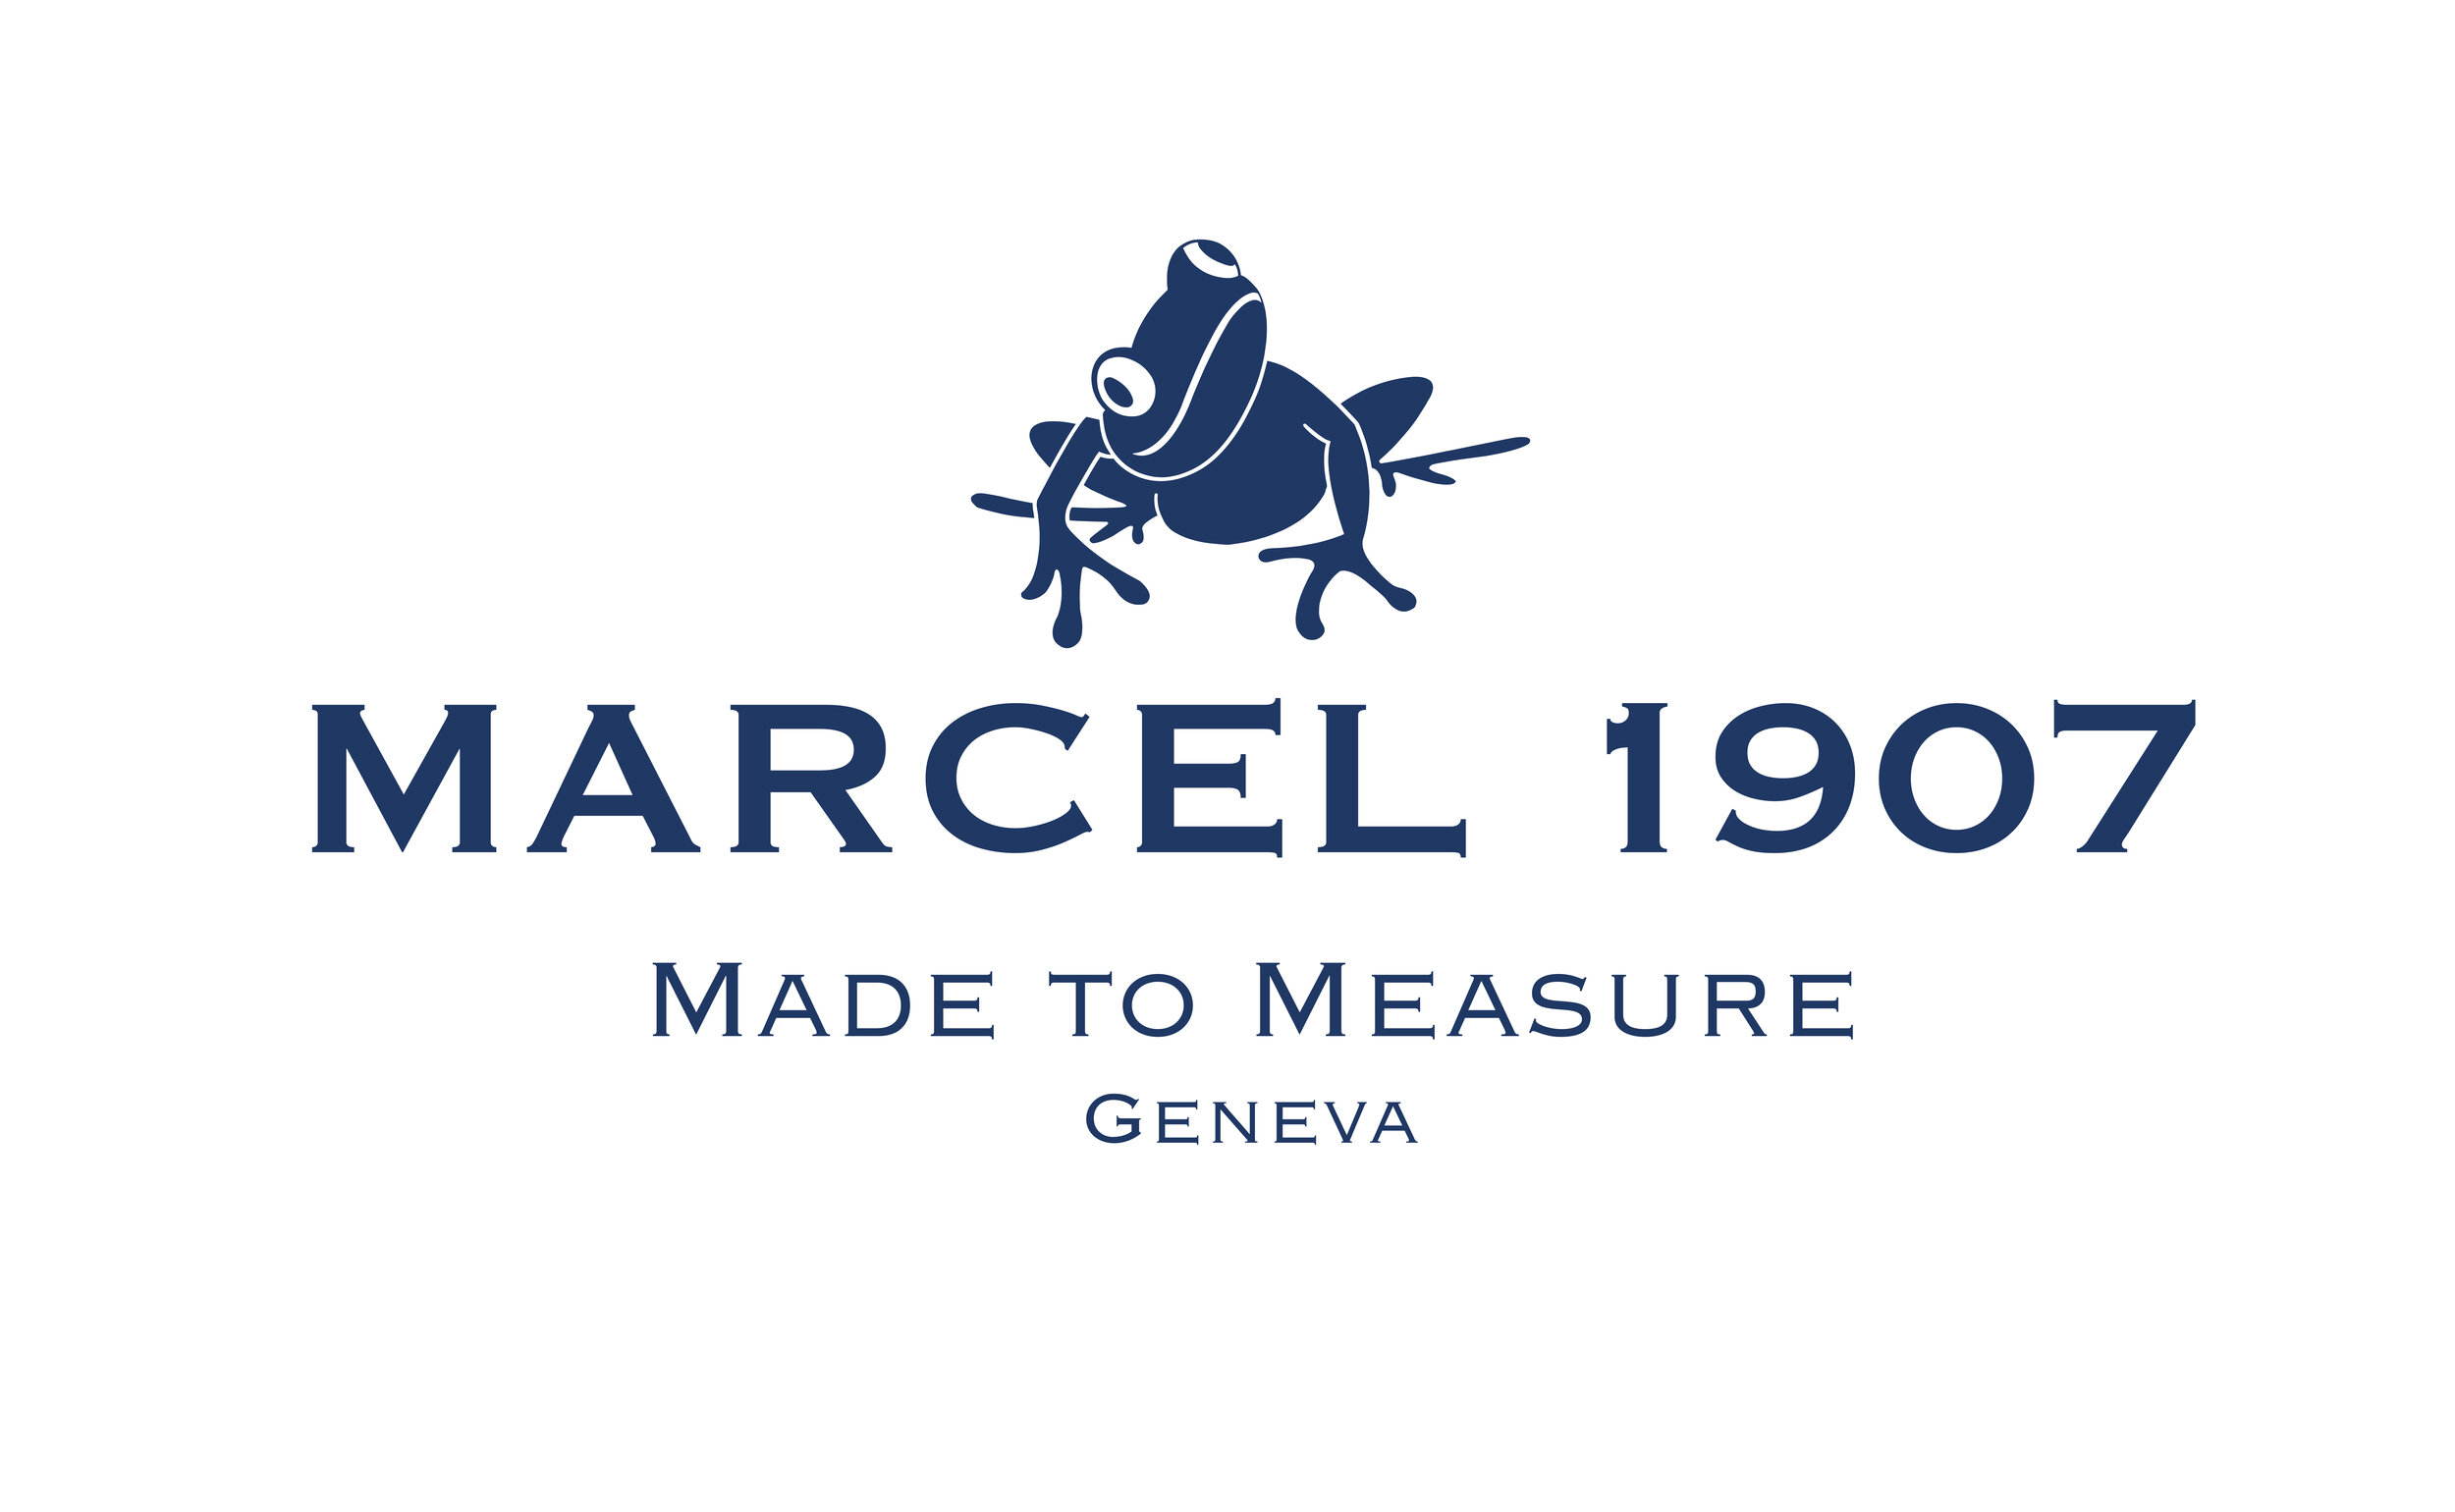 Marcel 1907 - Made to Measure Cufflinks